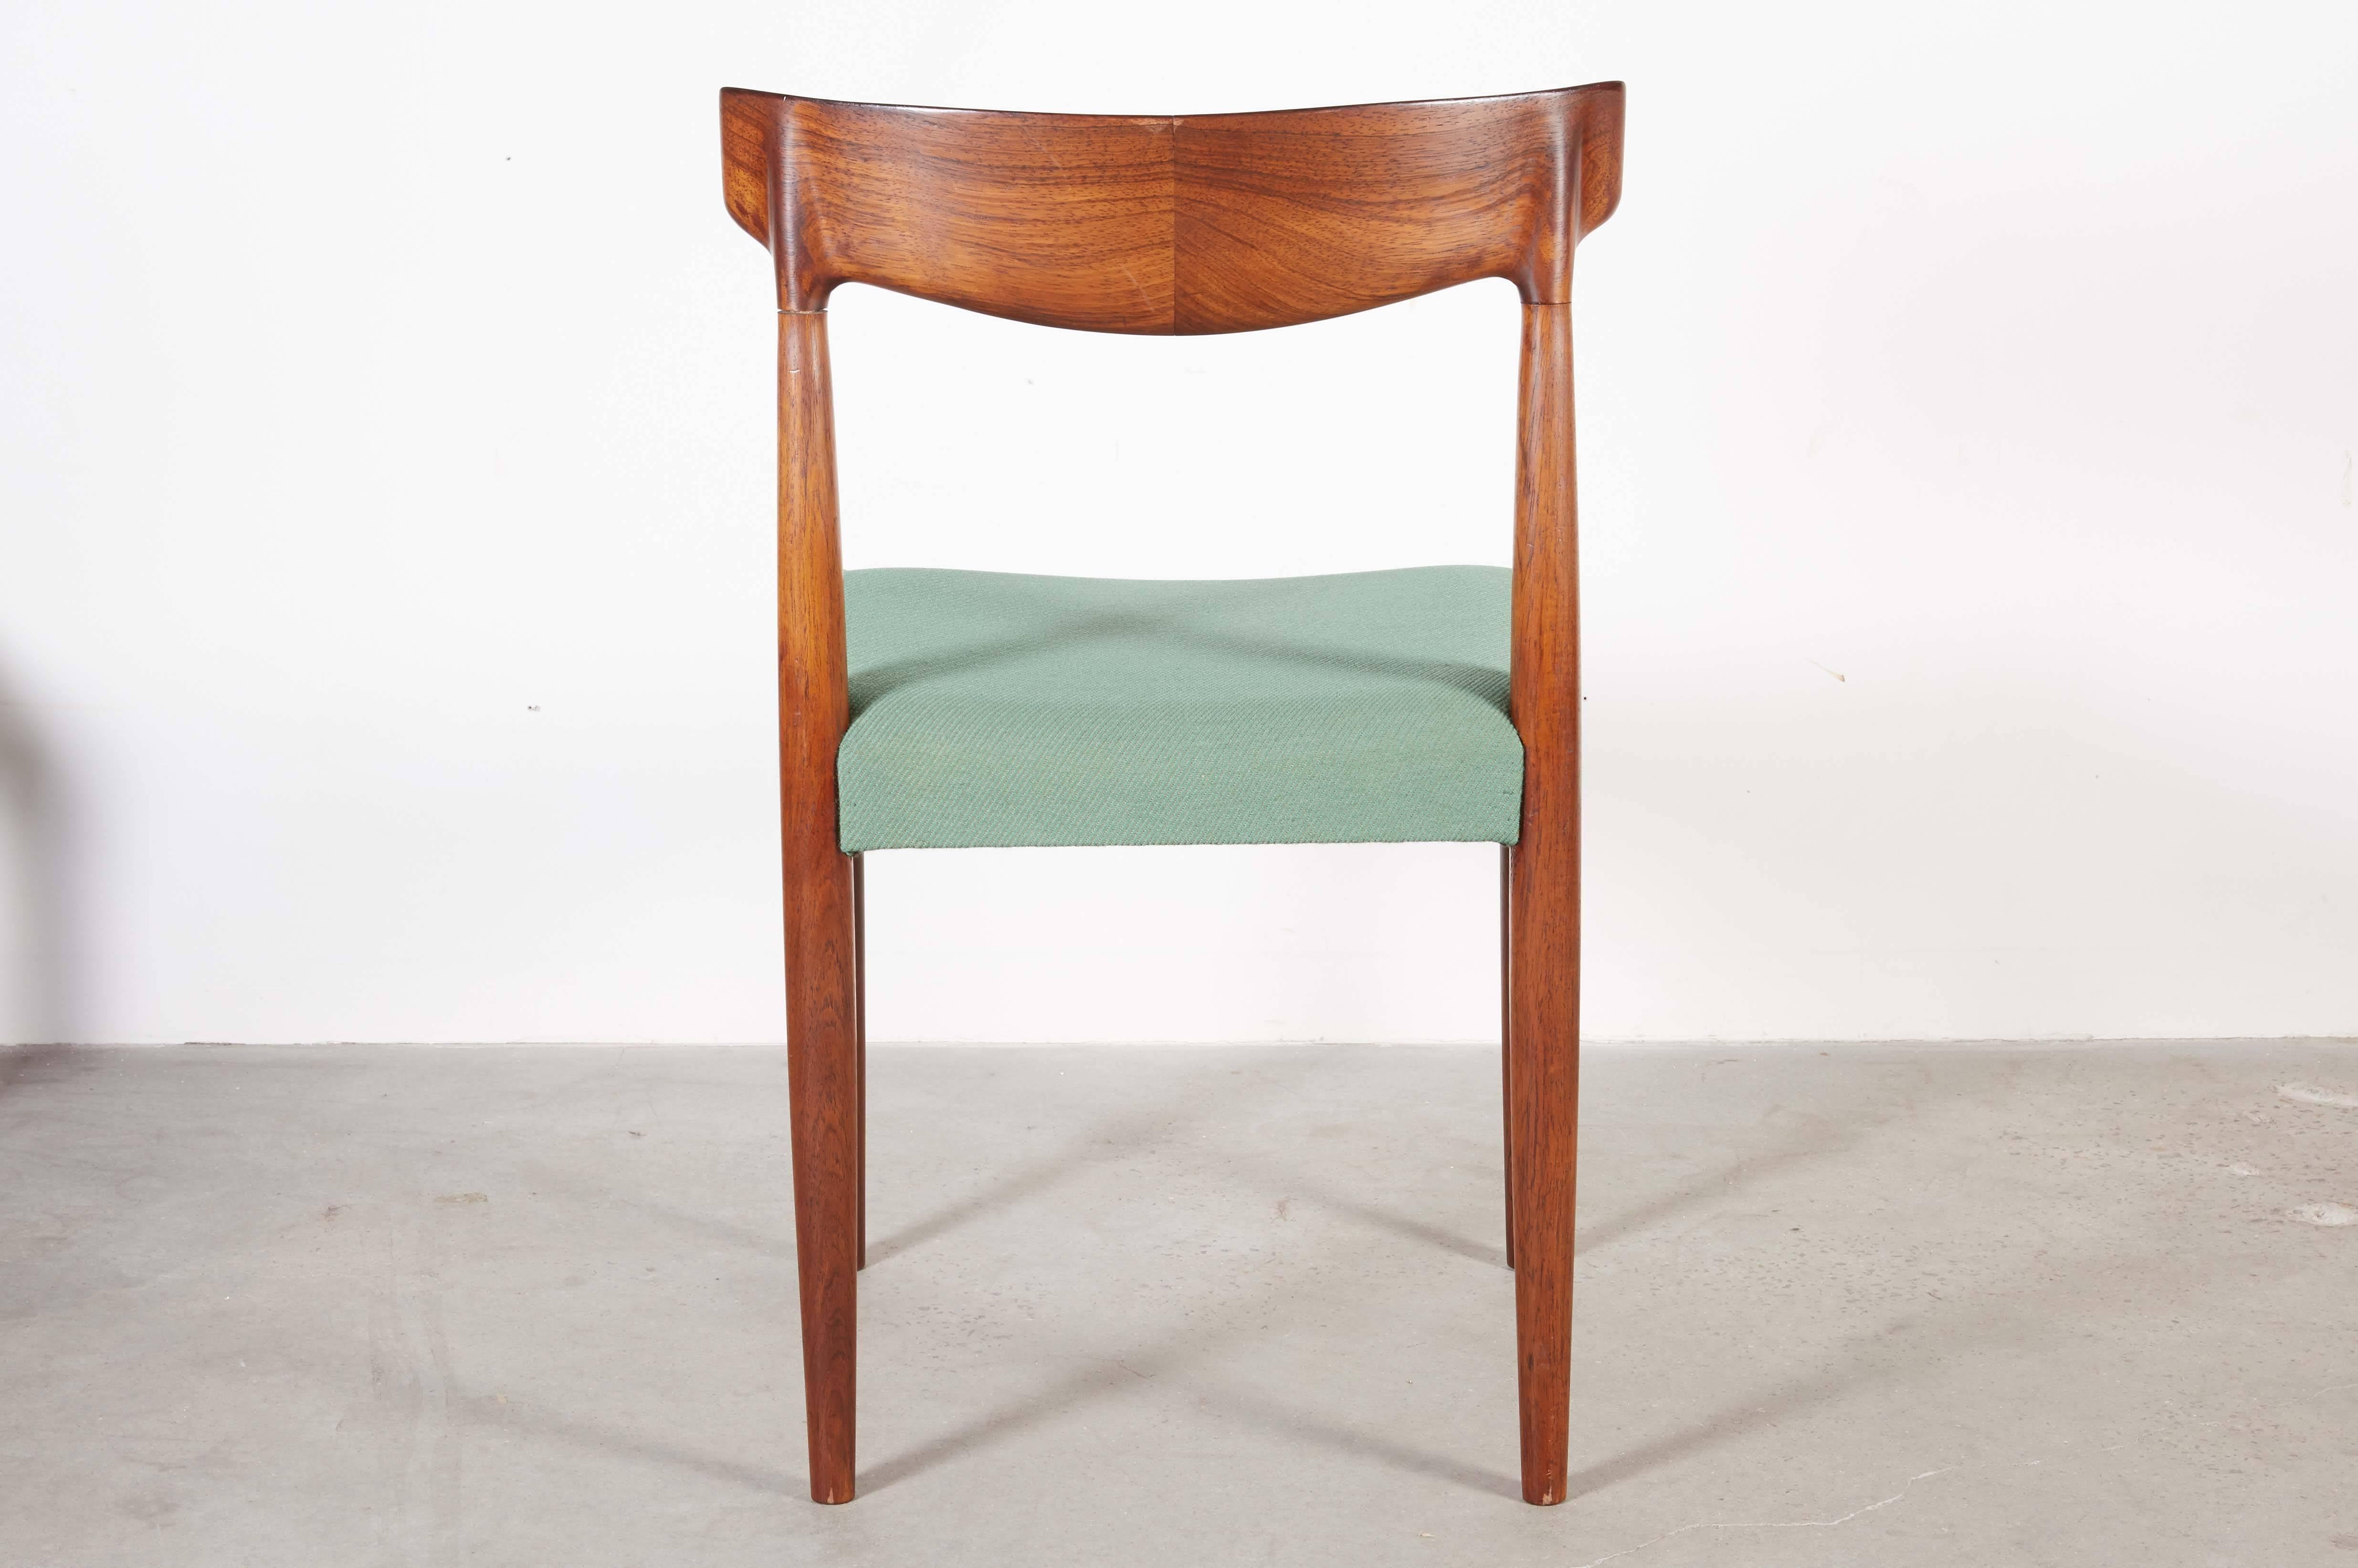 Rosewood Danish Dining Chairs by Knud Faerch, set of 6